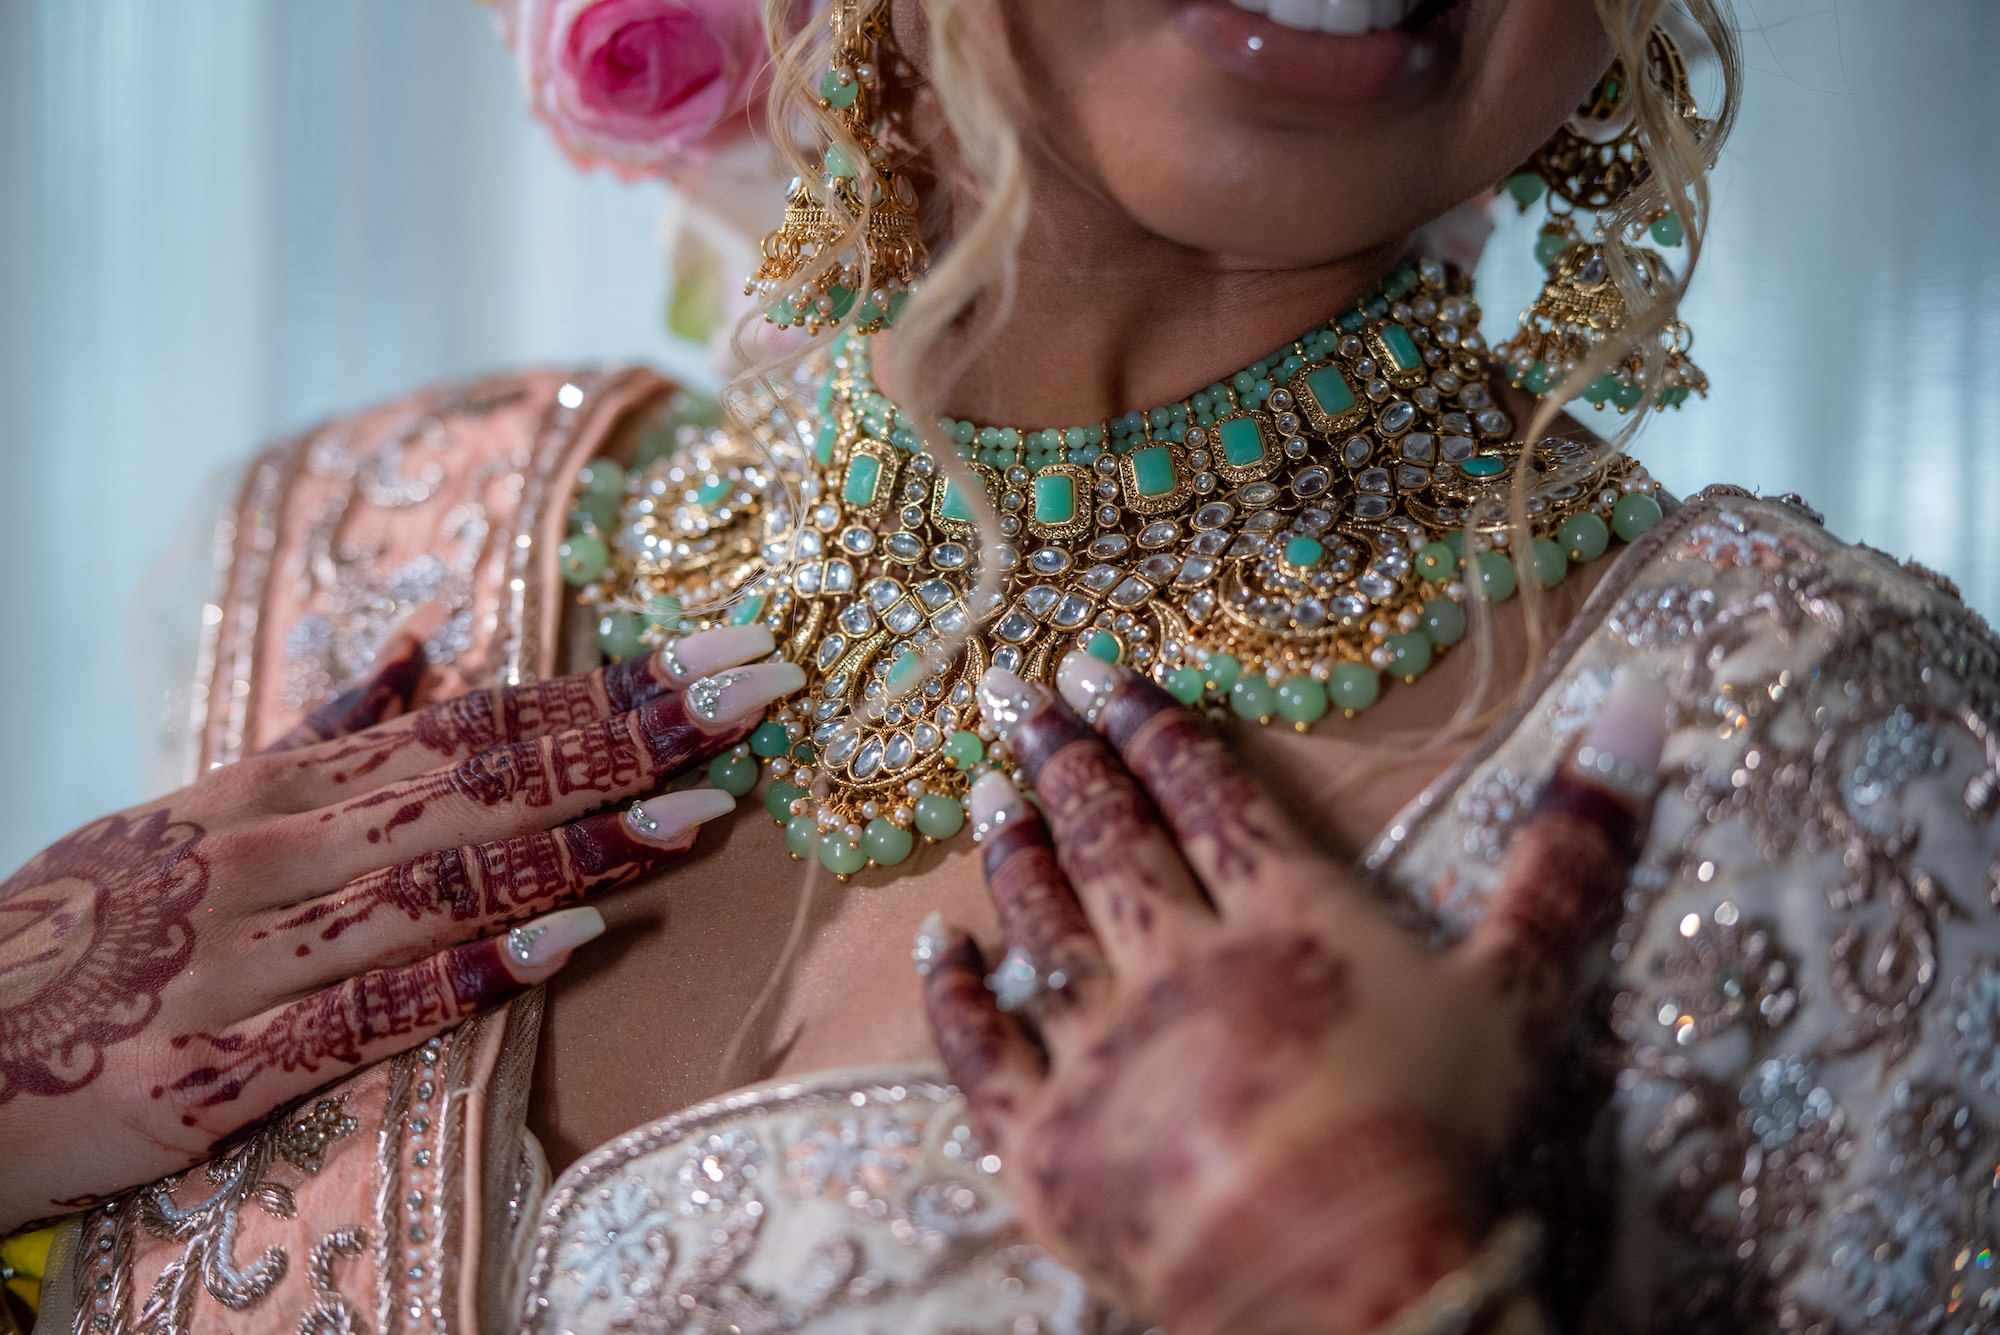 Florida Bride In Traditional Turquoise Necklace, Henna, Designed Nails, Indian Wedding